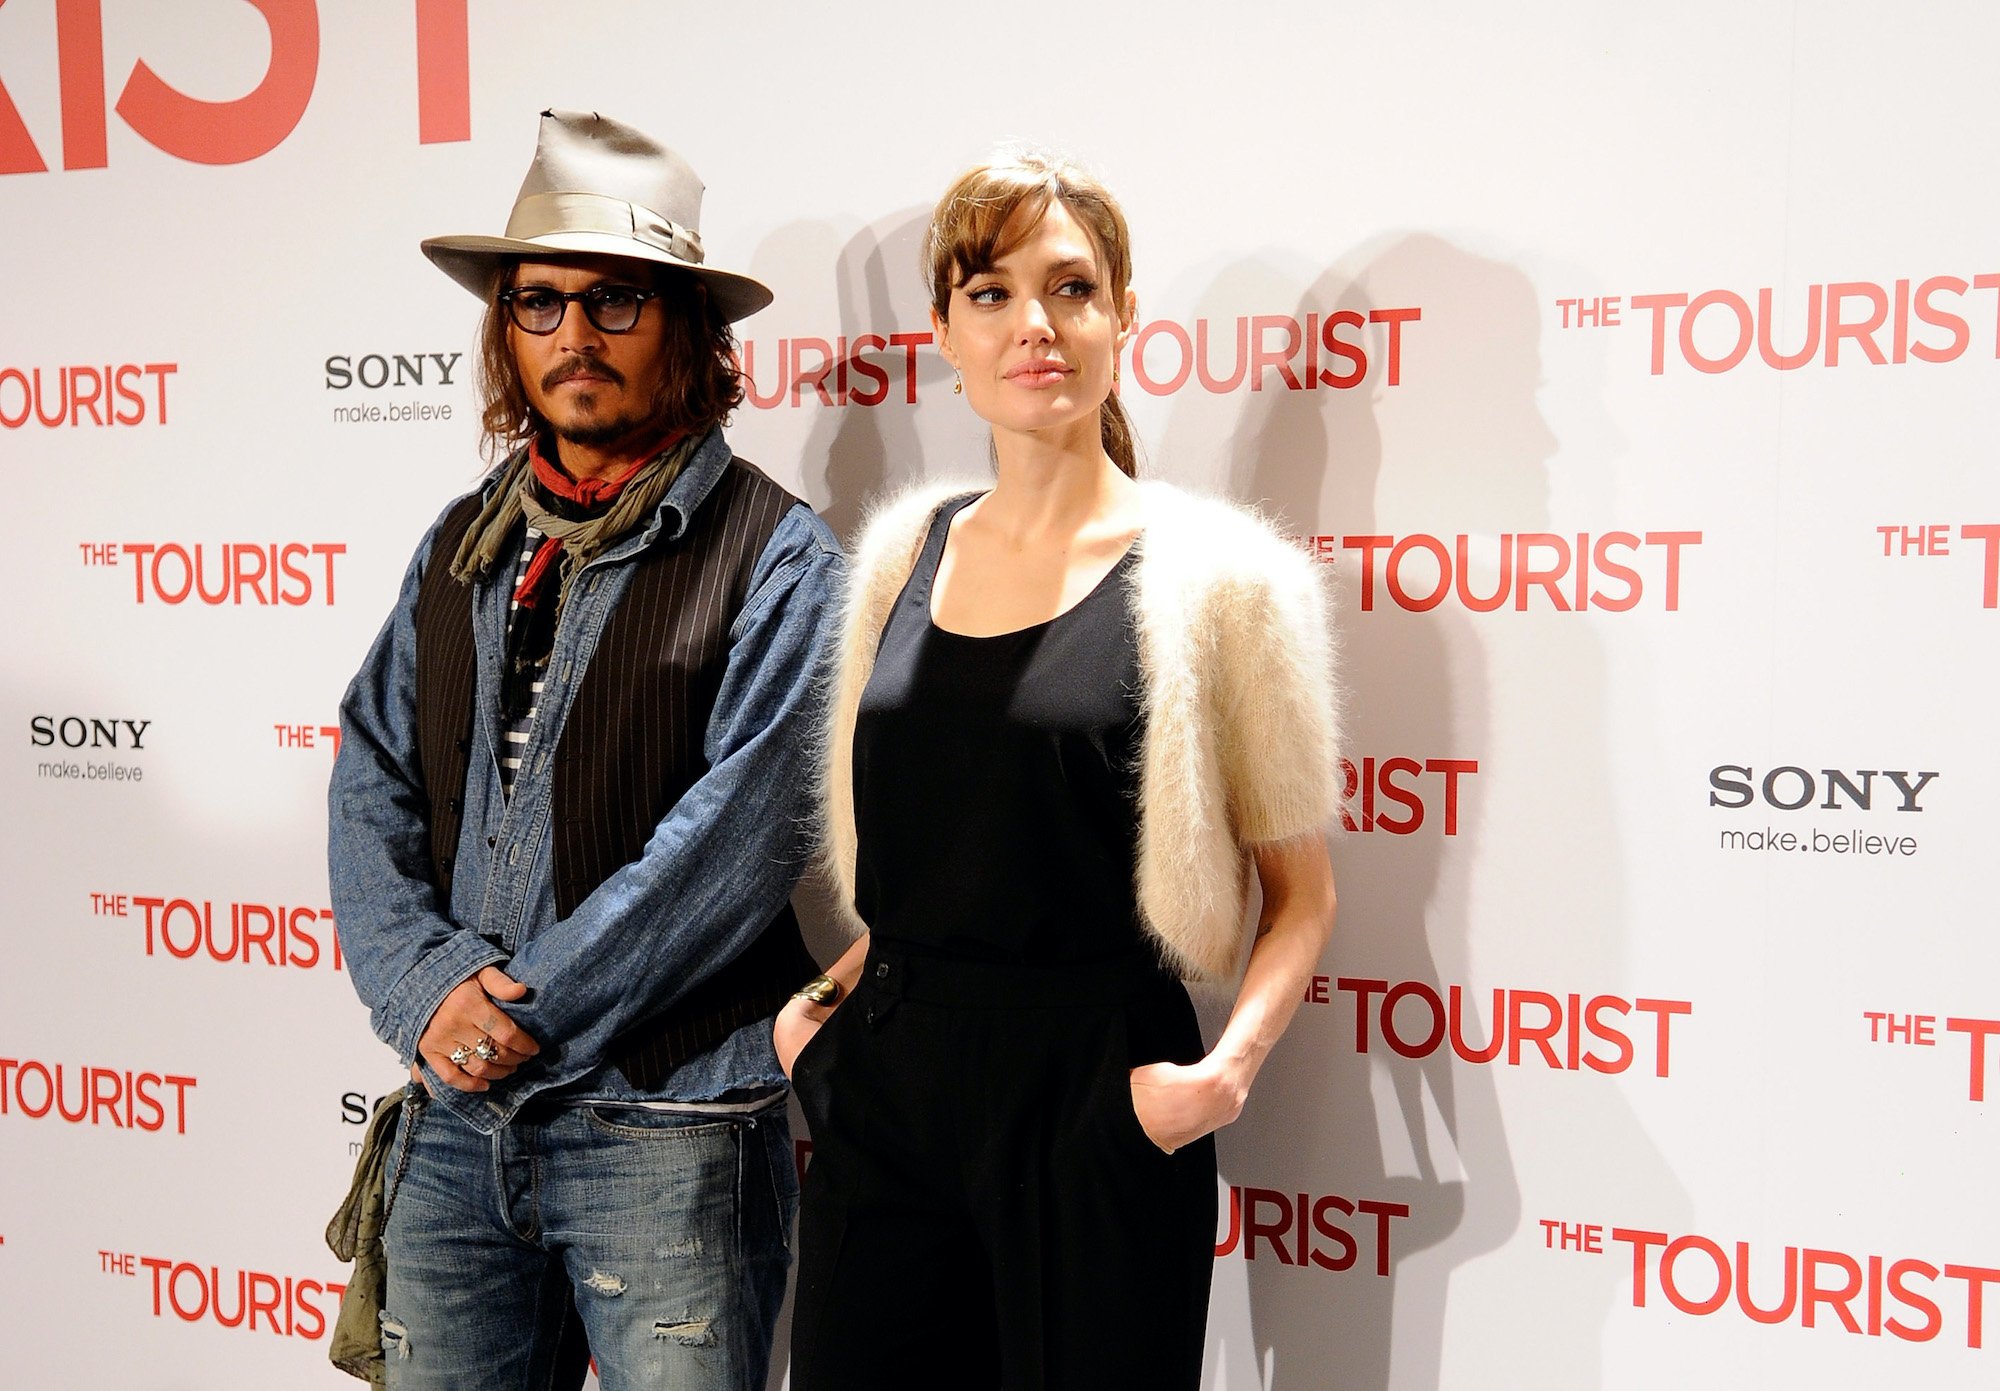 (L-R) Johnny Depp and Angelina Jolie smiling in front of a while background with repeating logos